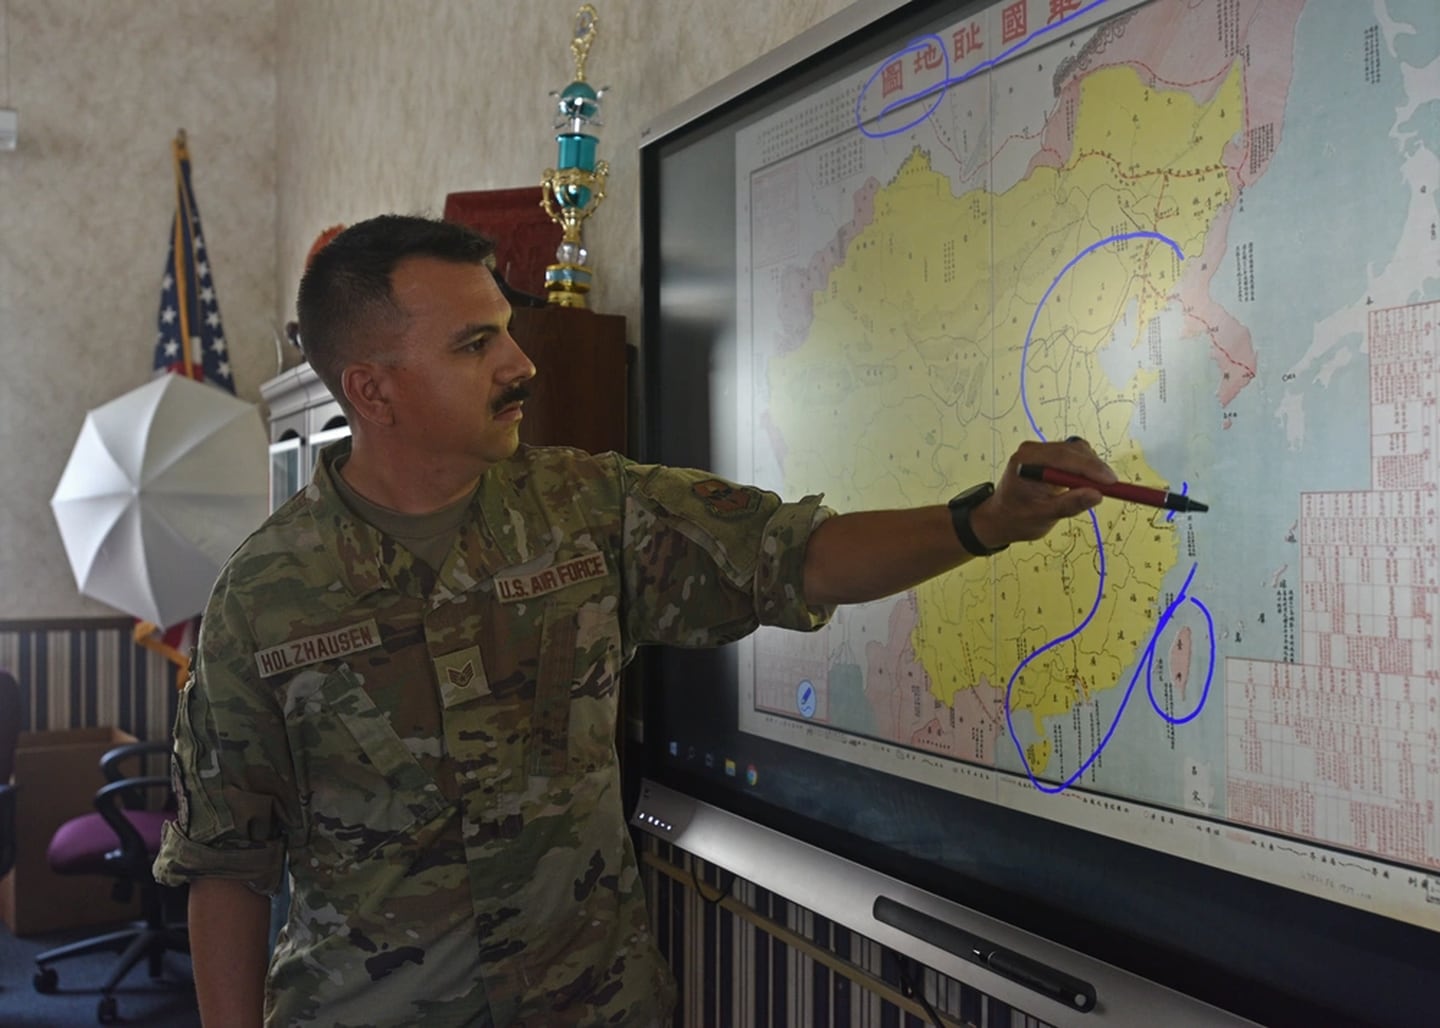 Air Force Staff Sgt. Uruwishi Holzhausen, 314th Training Squadron military language instructor, discusses the geography of China at the Presidio of Monterey, California, July 21, 2021. (Senior Airman Ashley Thrash/Air Force)